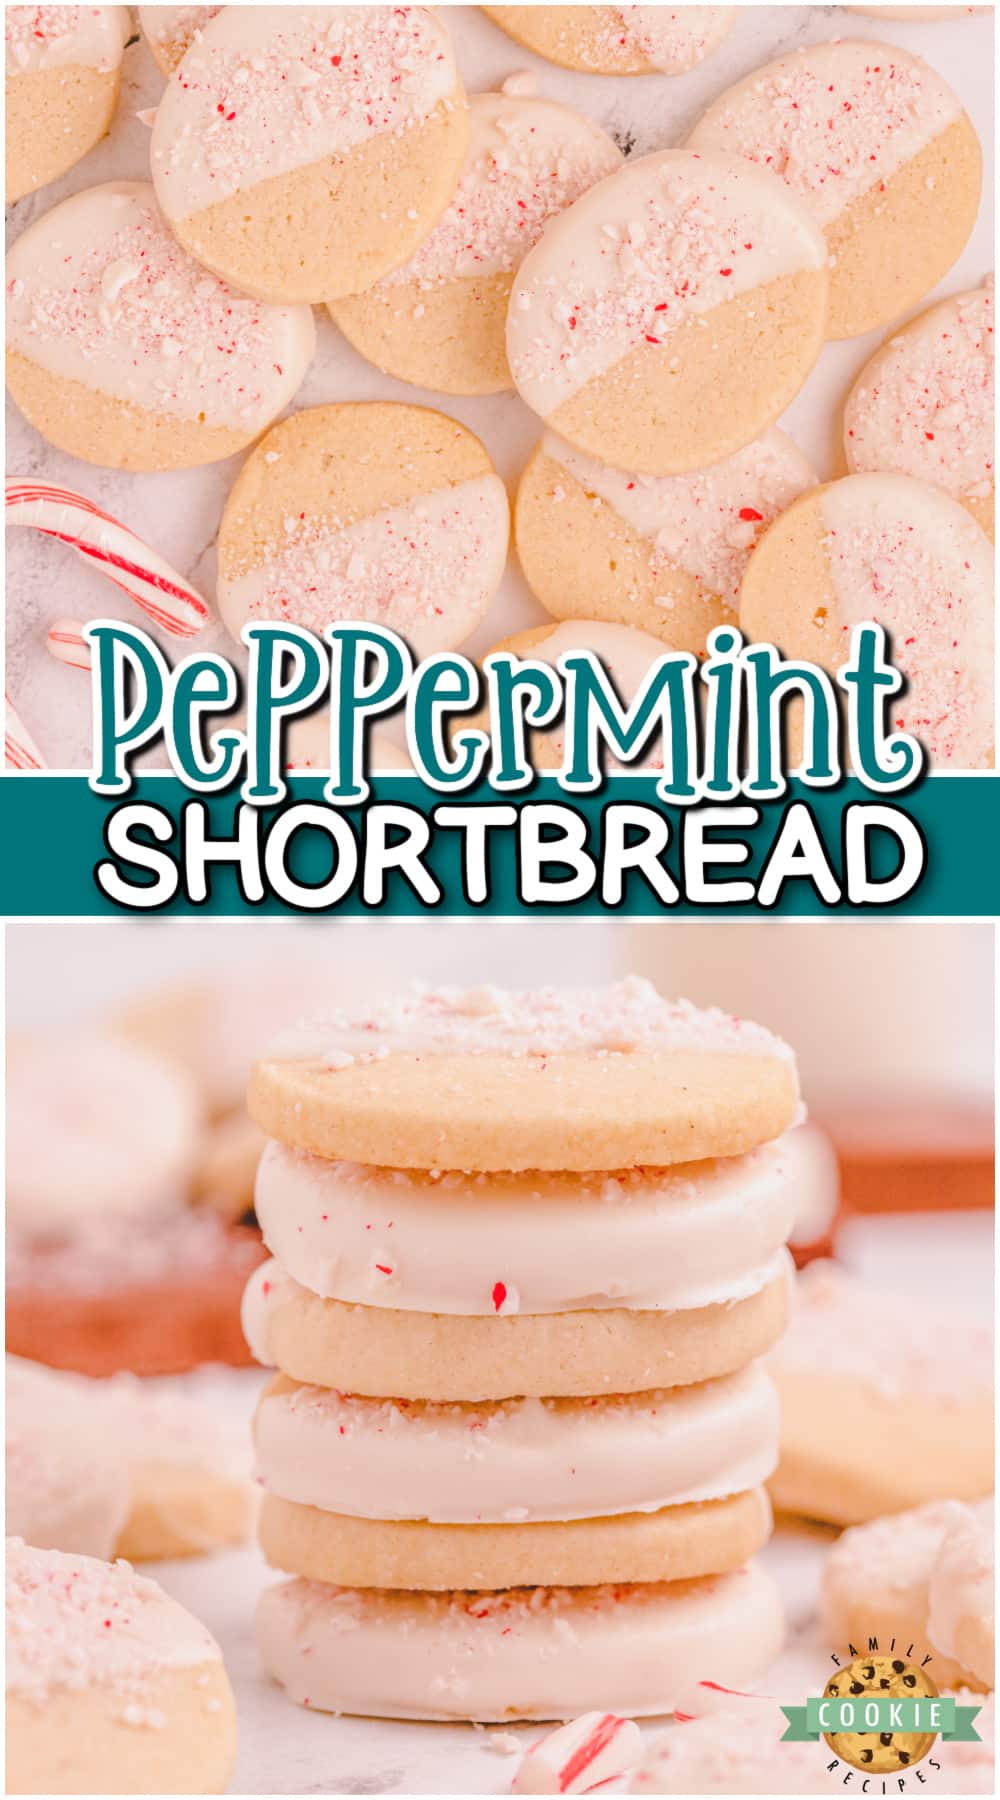 Peppermint shortbread cookies are festive buttery cookies topped with white chocolate & candy cane pieces! Shortbread cookies perfect for Christmas!